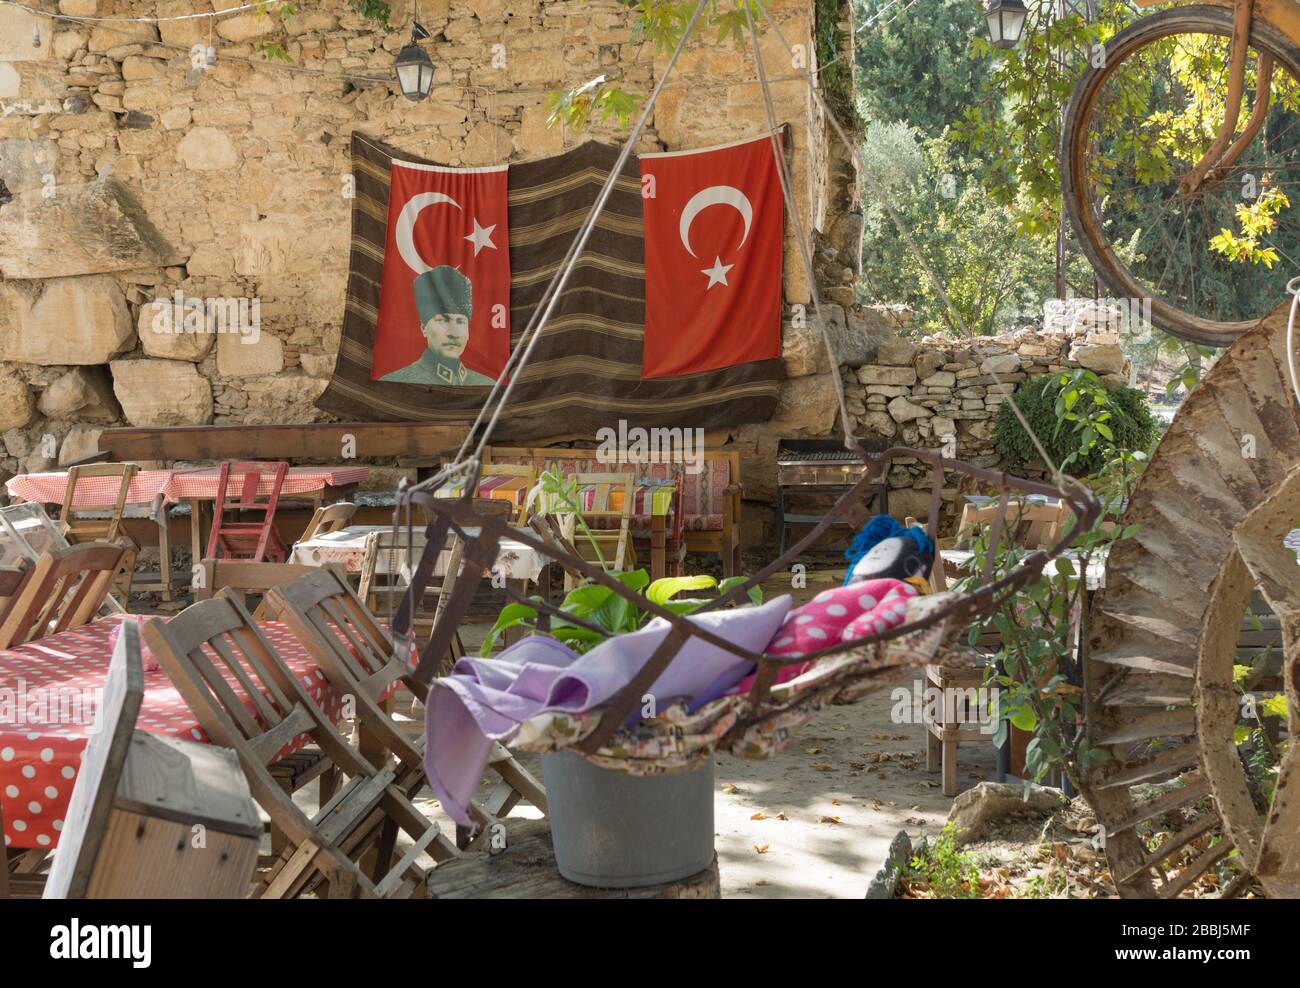 turkish flags in a cafe Stock Photo